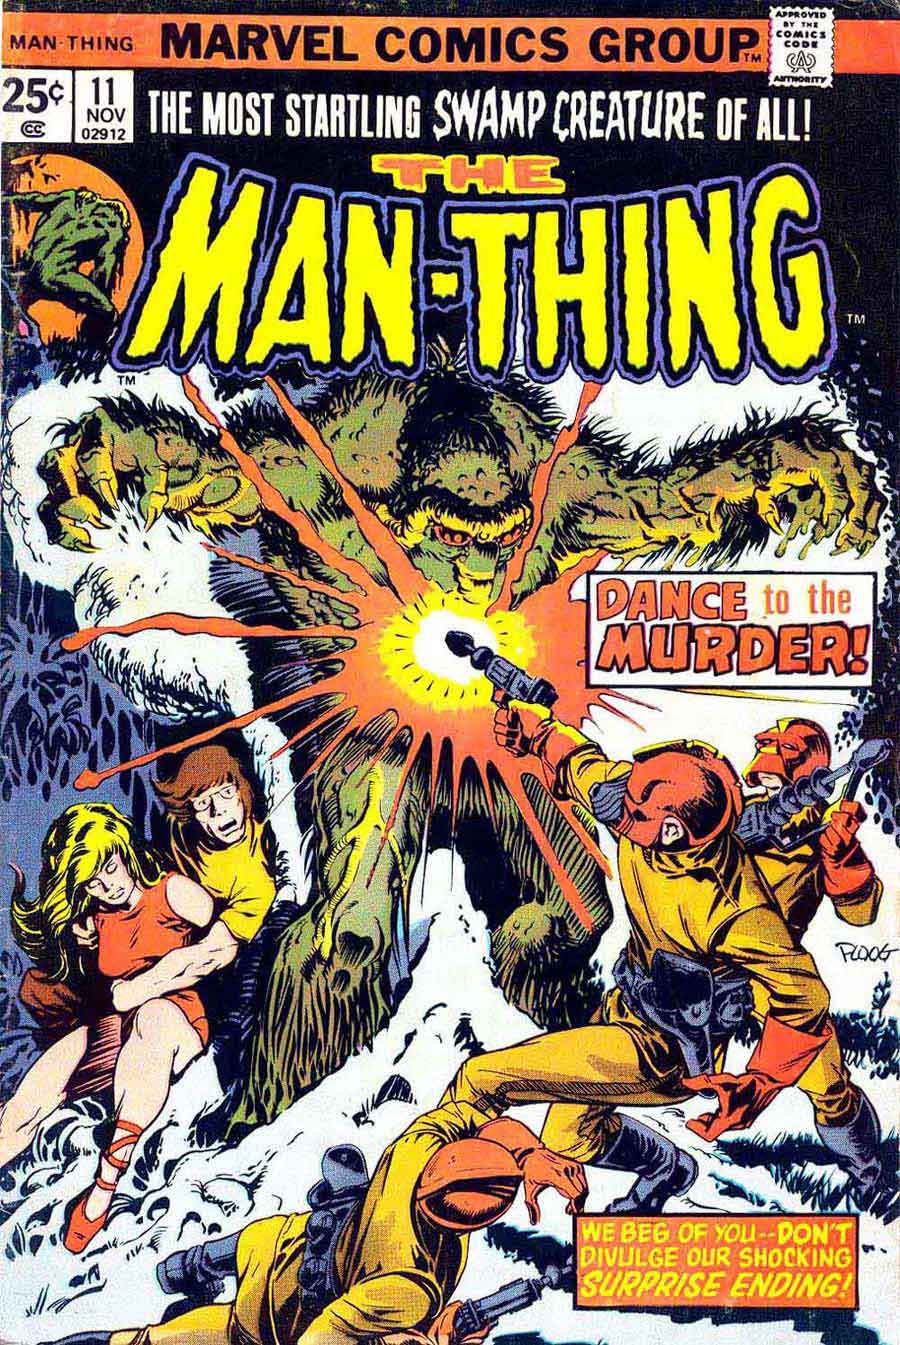 Man-Thing v1 #11 marvel 1970s bronze age comic book cover art by Mike Ploog